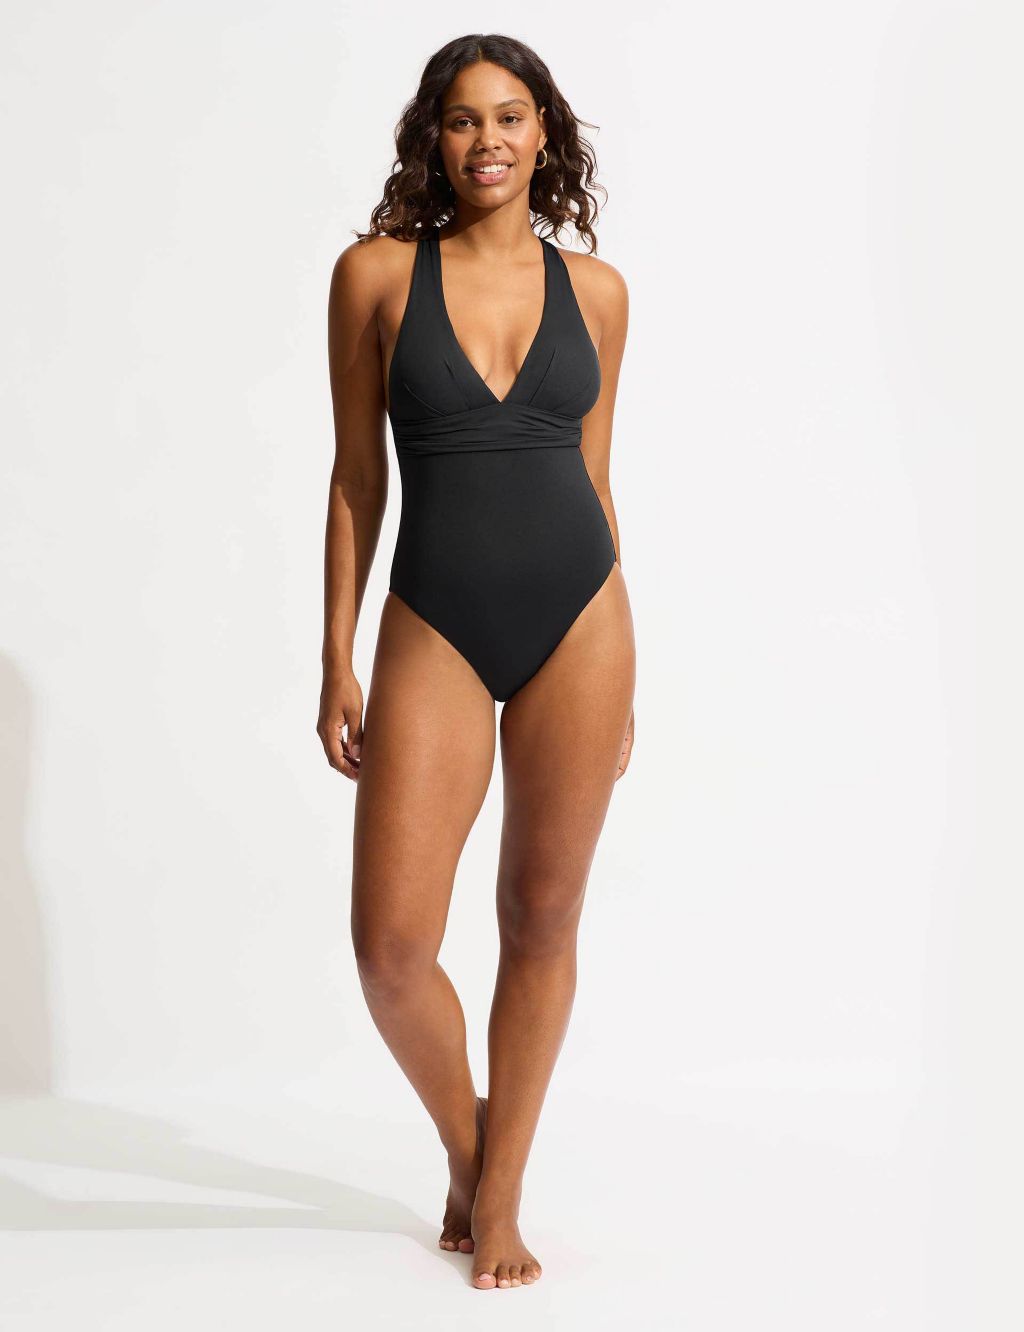 Collective Padded Plunge Swimsuit image 1